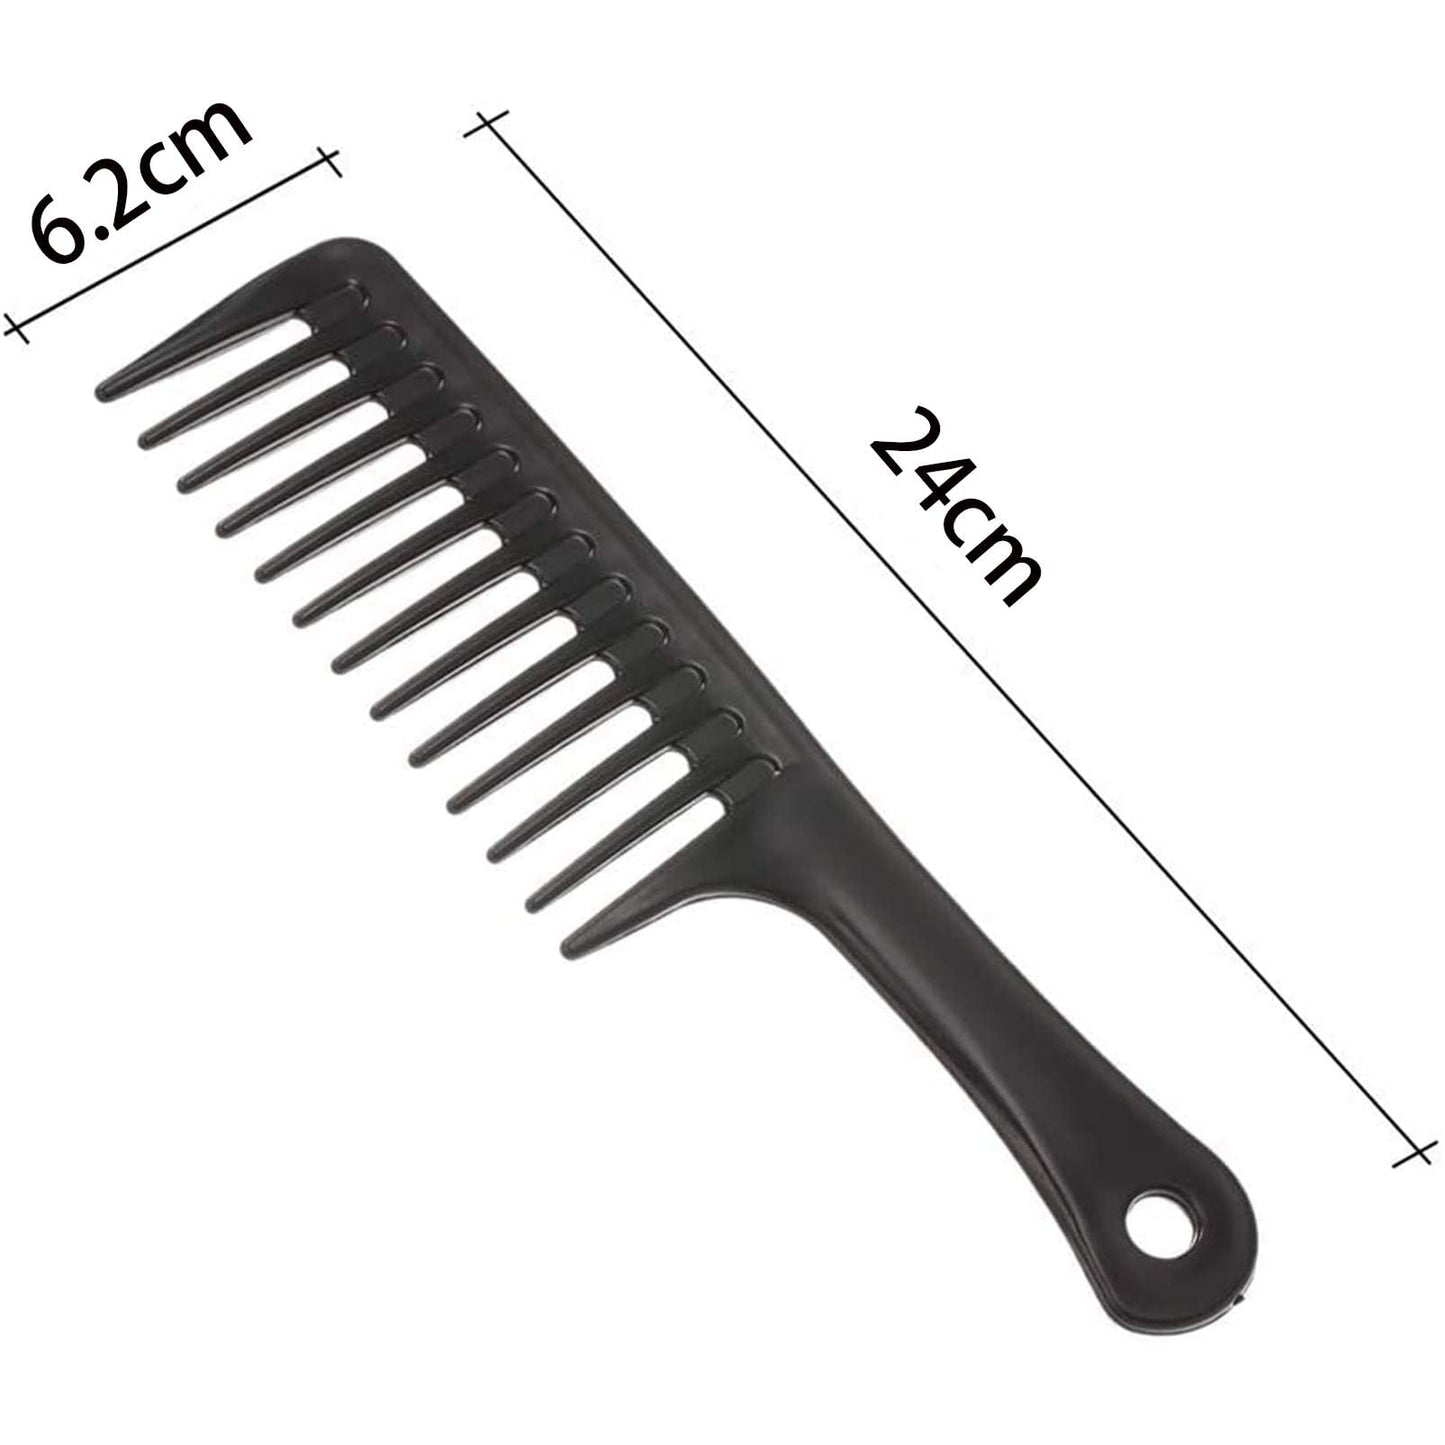 NC Wide Tooth Detangling Handgrip Paddle Hair Comb for Long Hair (Black)